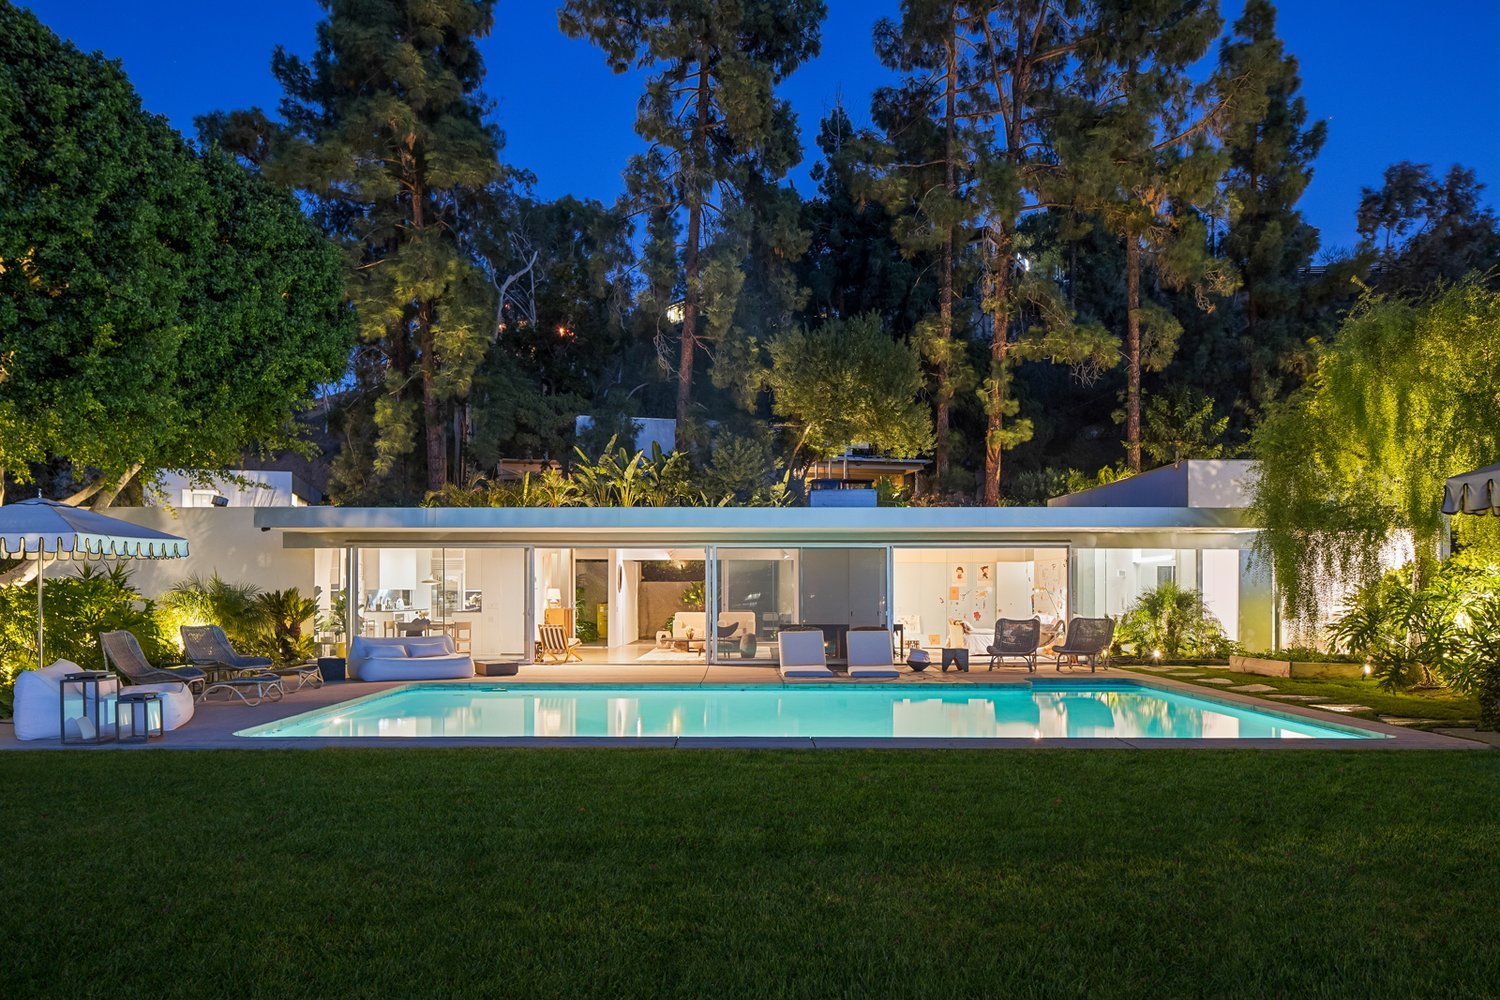 Francis YorkThe Loring House in Los Angeles by Architect Richard Neutra 1.jpg